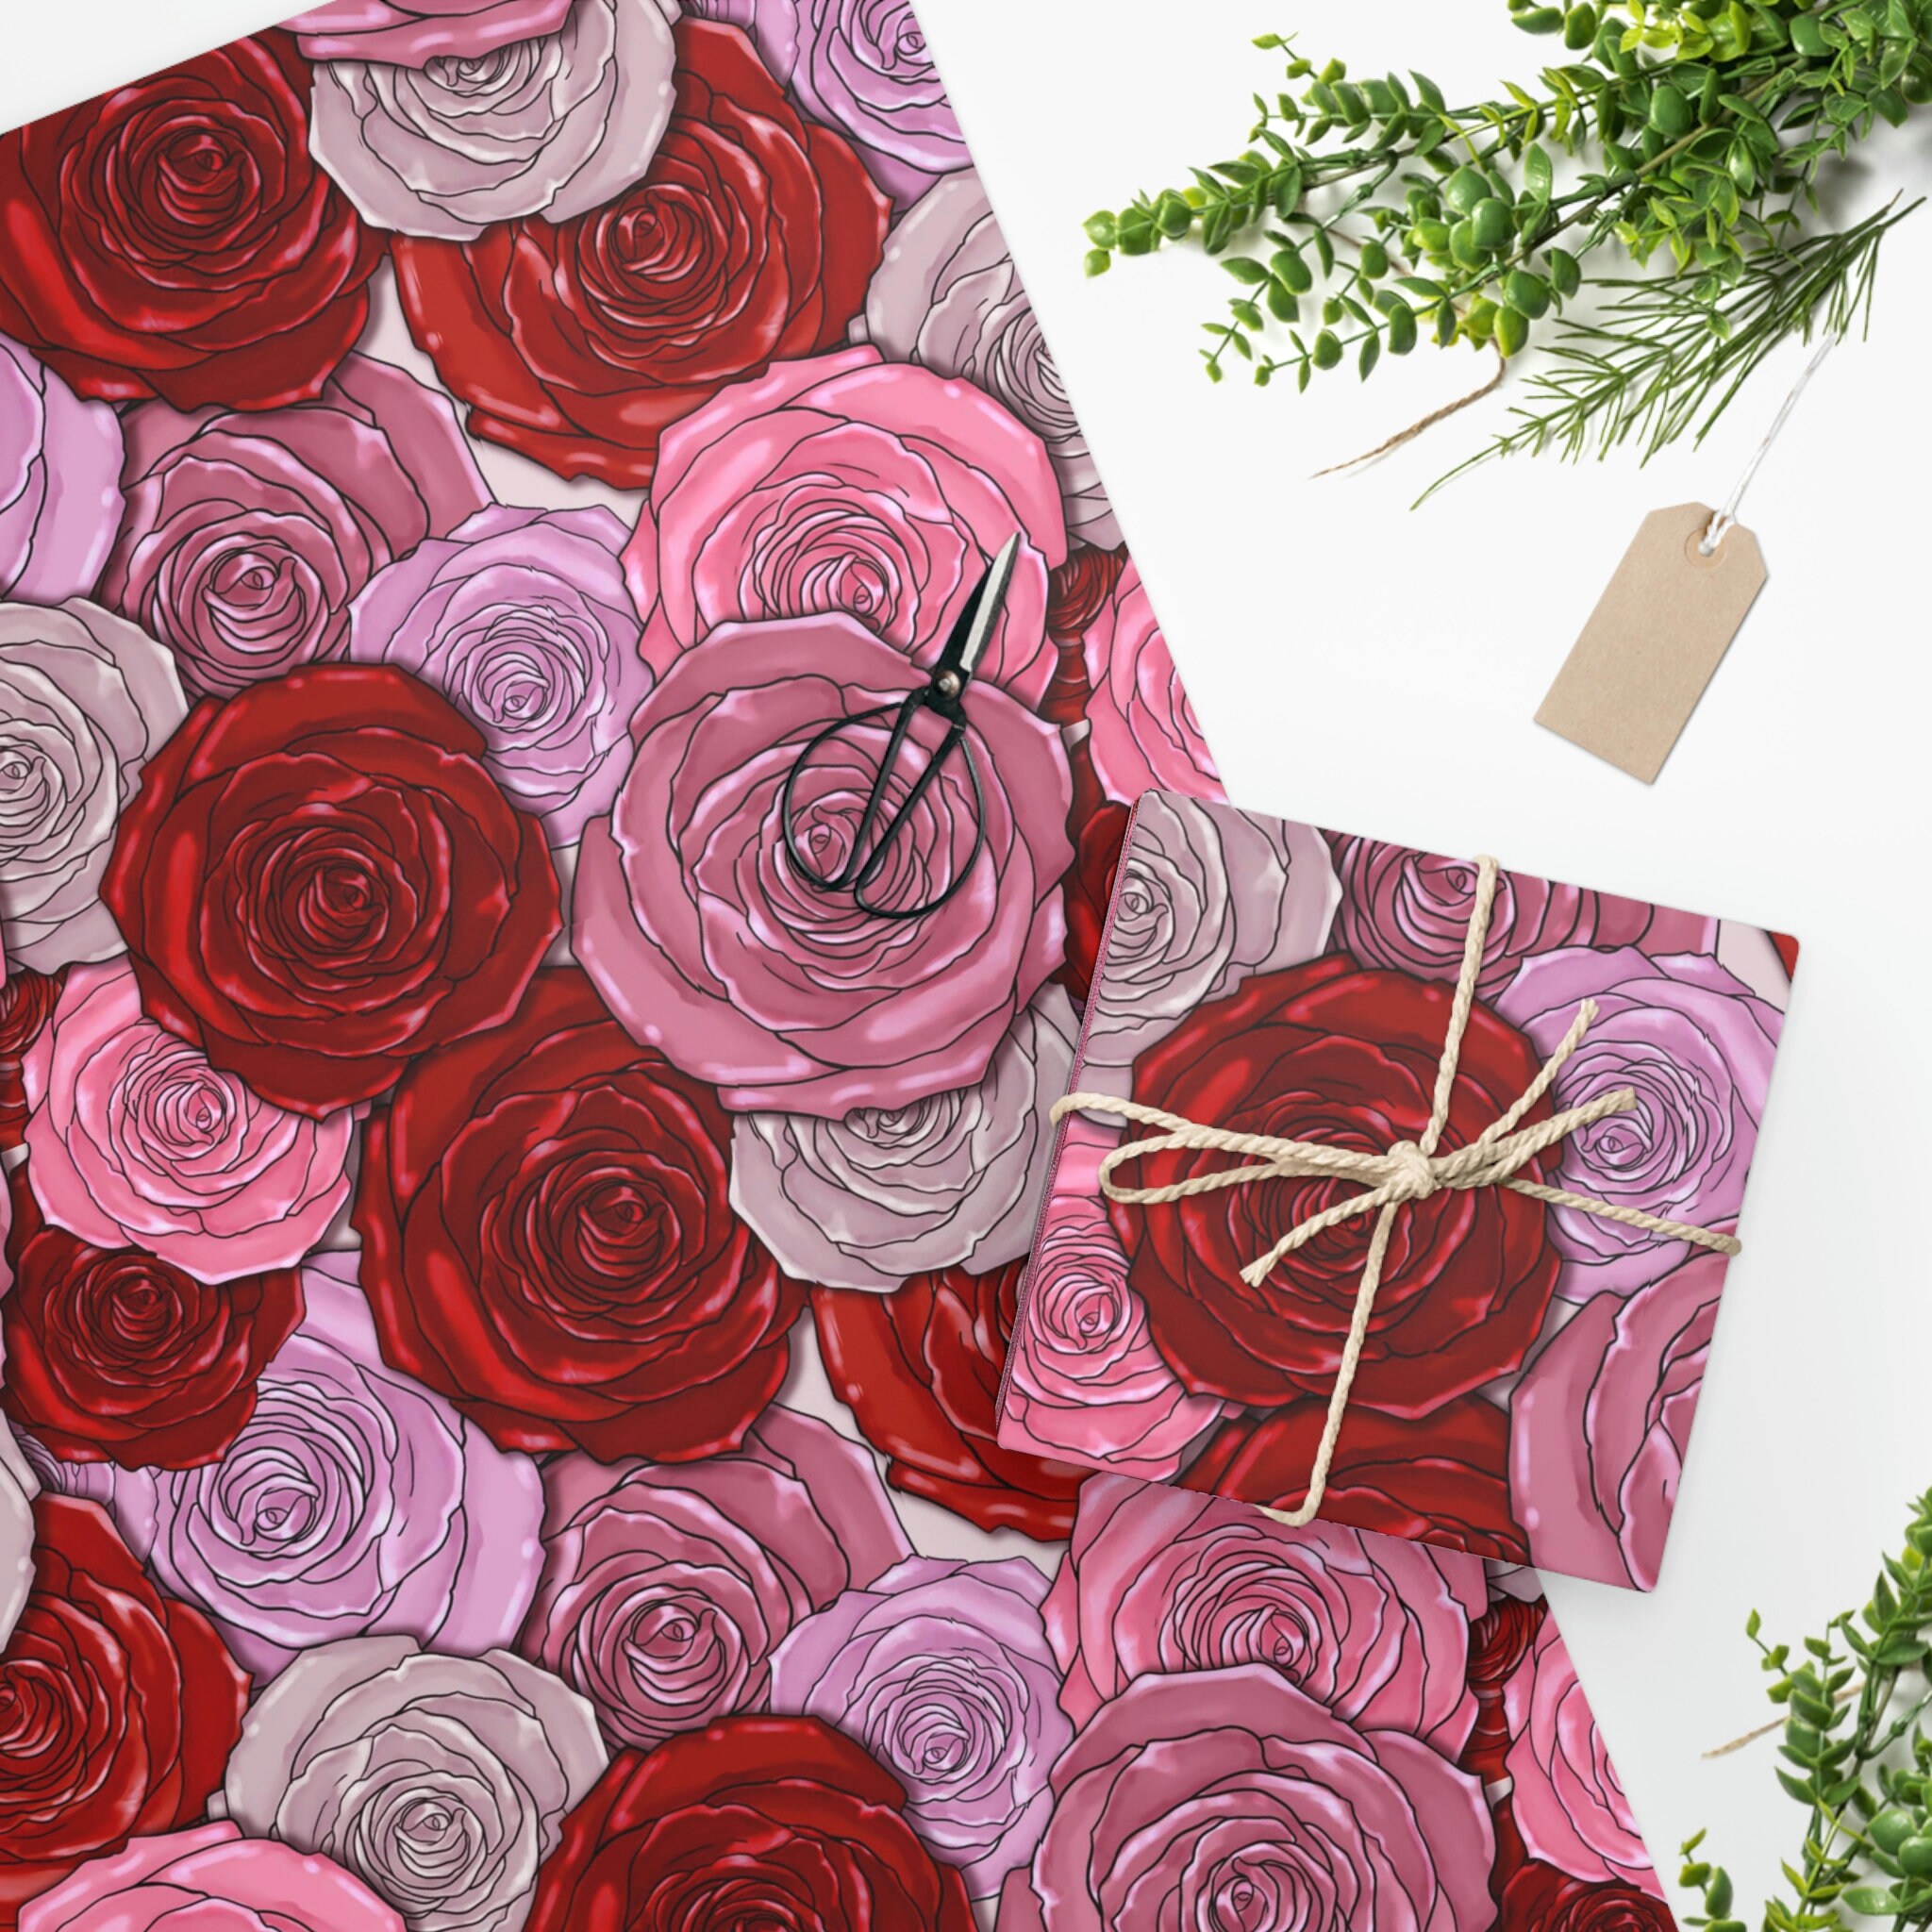 Red and Pink Rose Dissolvable Wrapping Paper